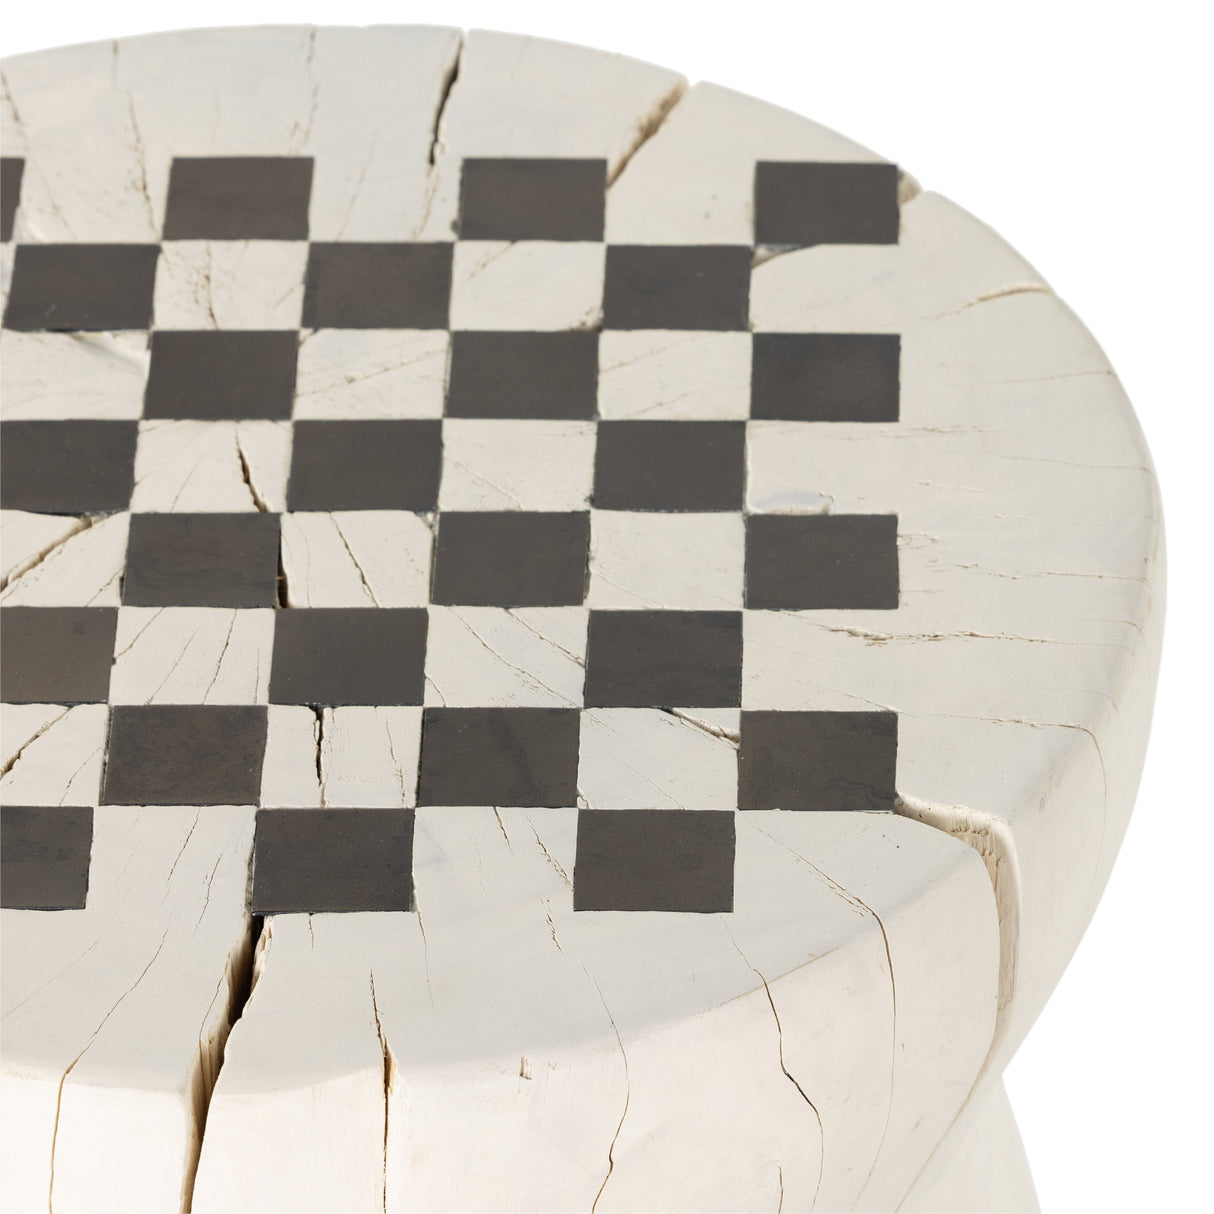 Four Hands Chess Table Games